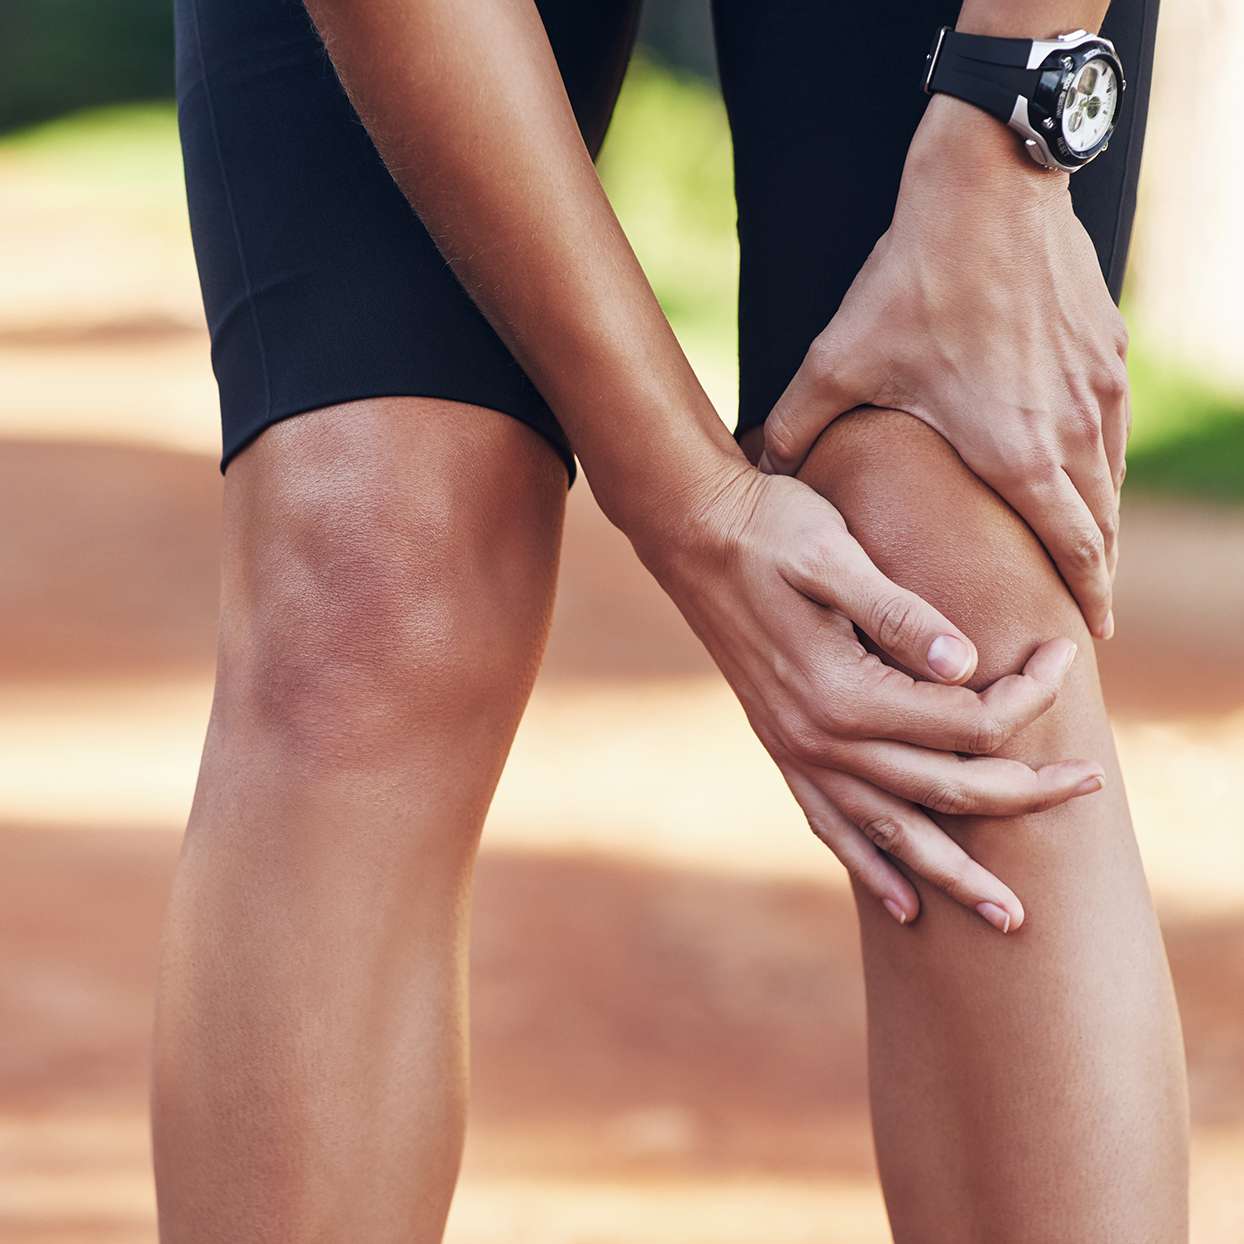 Women's Q-Angle Can Contribute to Knee Pain